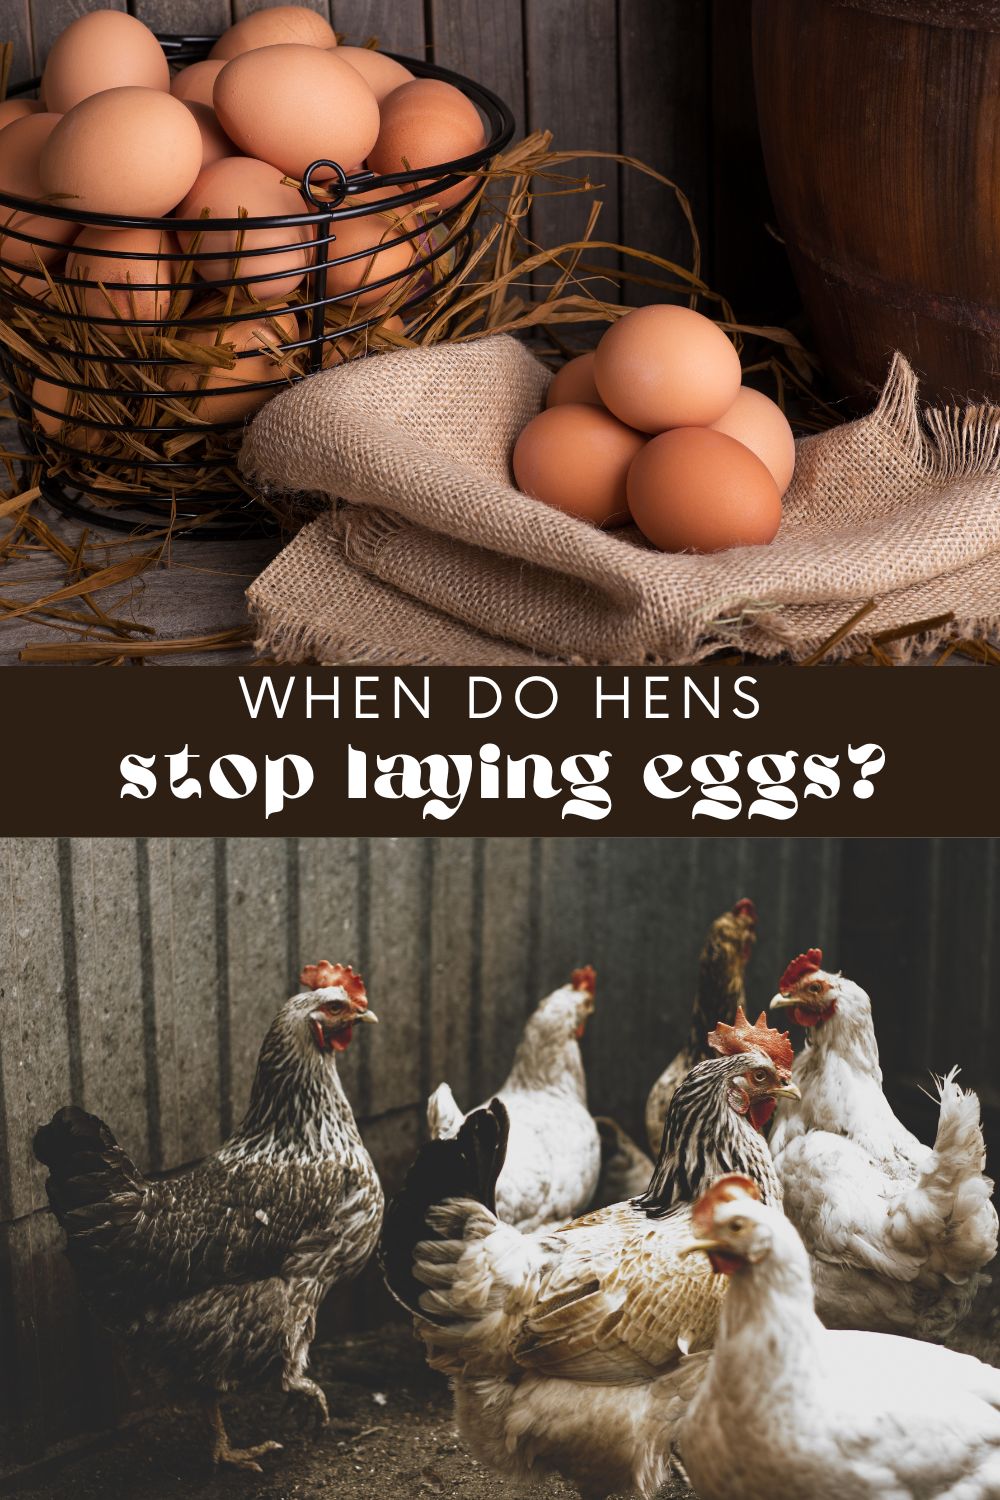 A young hen will typically begin to lay eggs at around 18-24 weeks of age, and will continue to lay eggs for several years. However, the age at which a hen stops laying eggs can vary depending on several factors. This is a common question and concern in backyard flocks wanting to collect as many fresh eggs as possible.